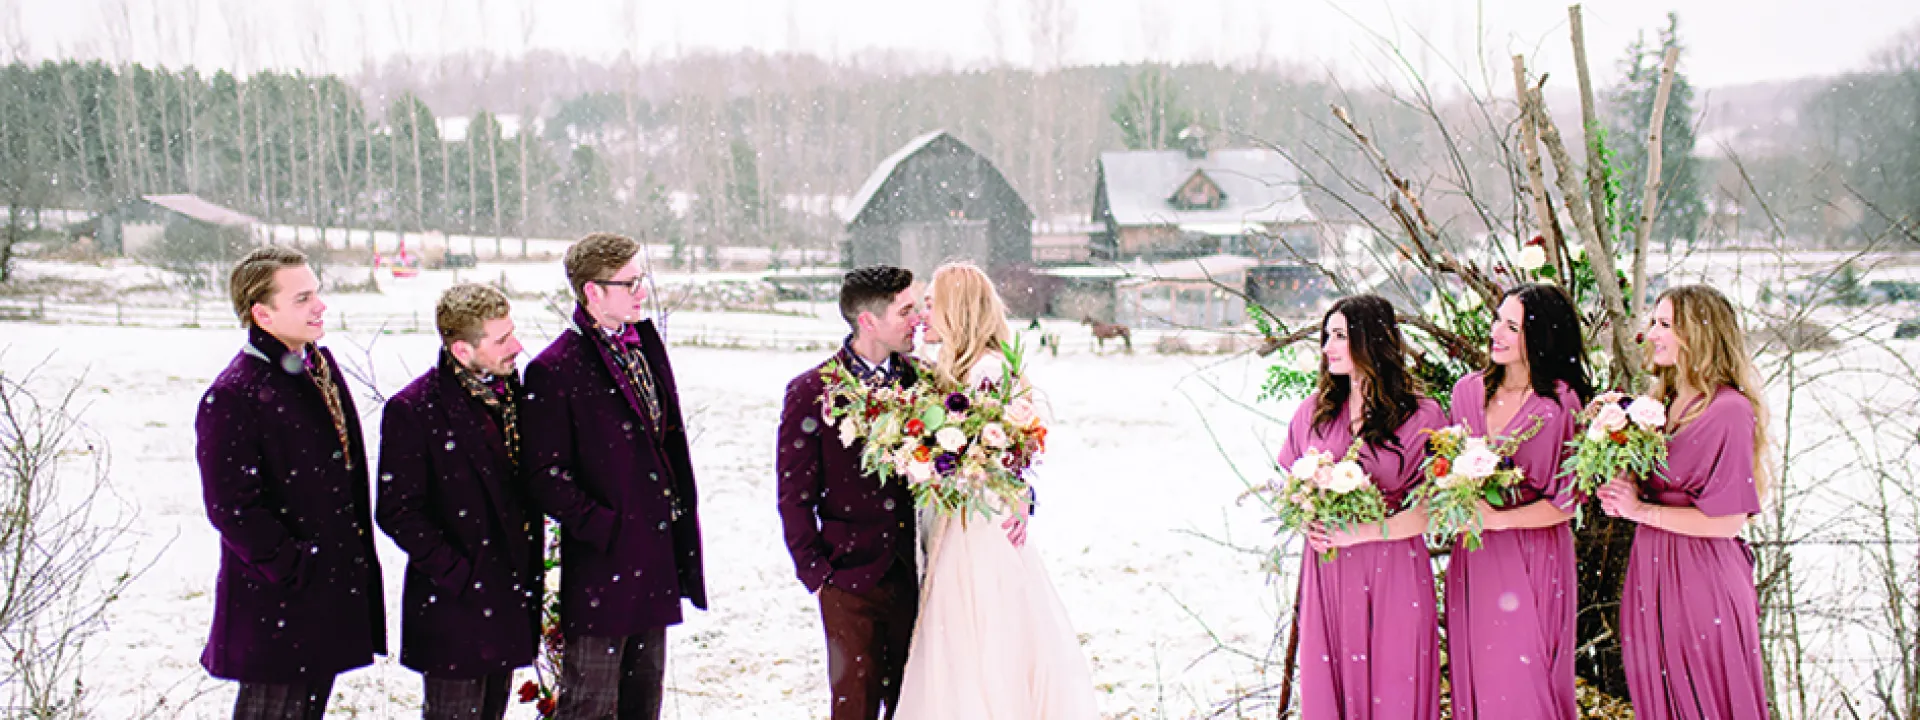 An intimate, elopement-style winter wedding in Wisconsin at The Enchanted Barn.